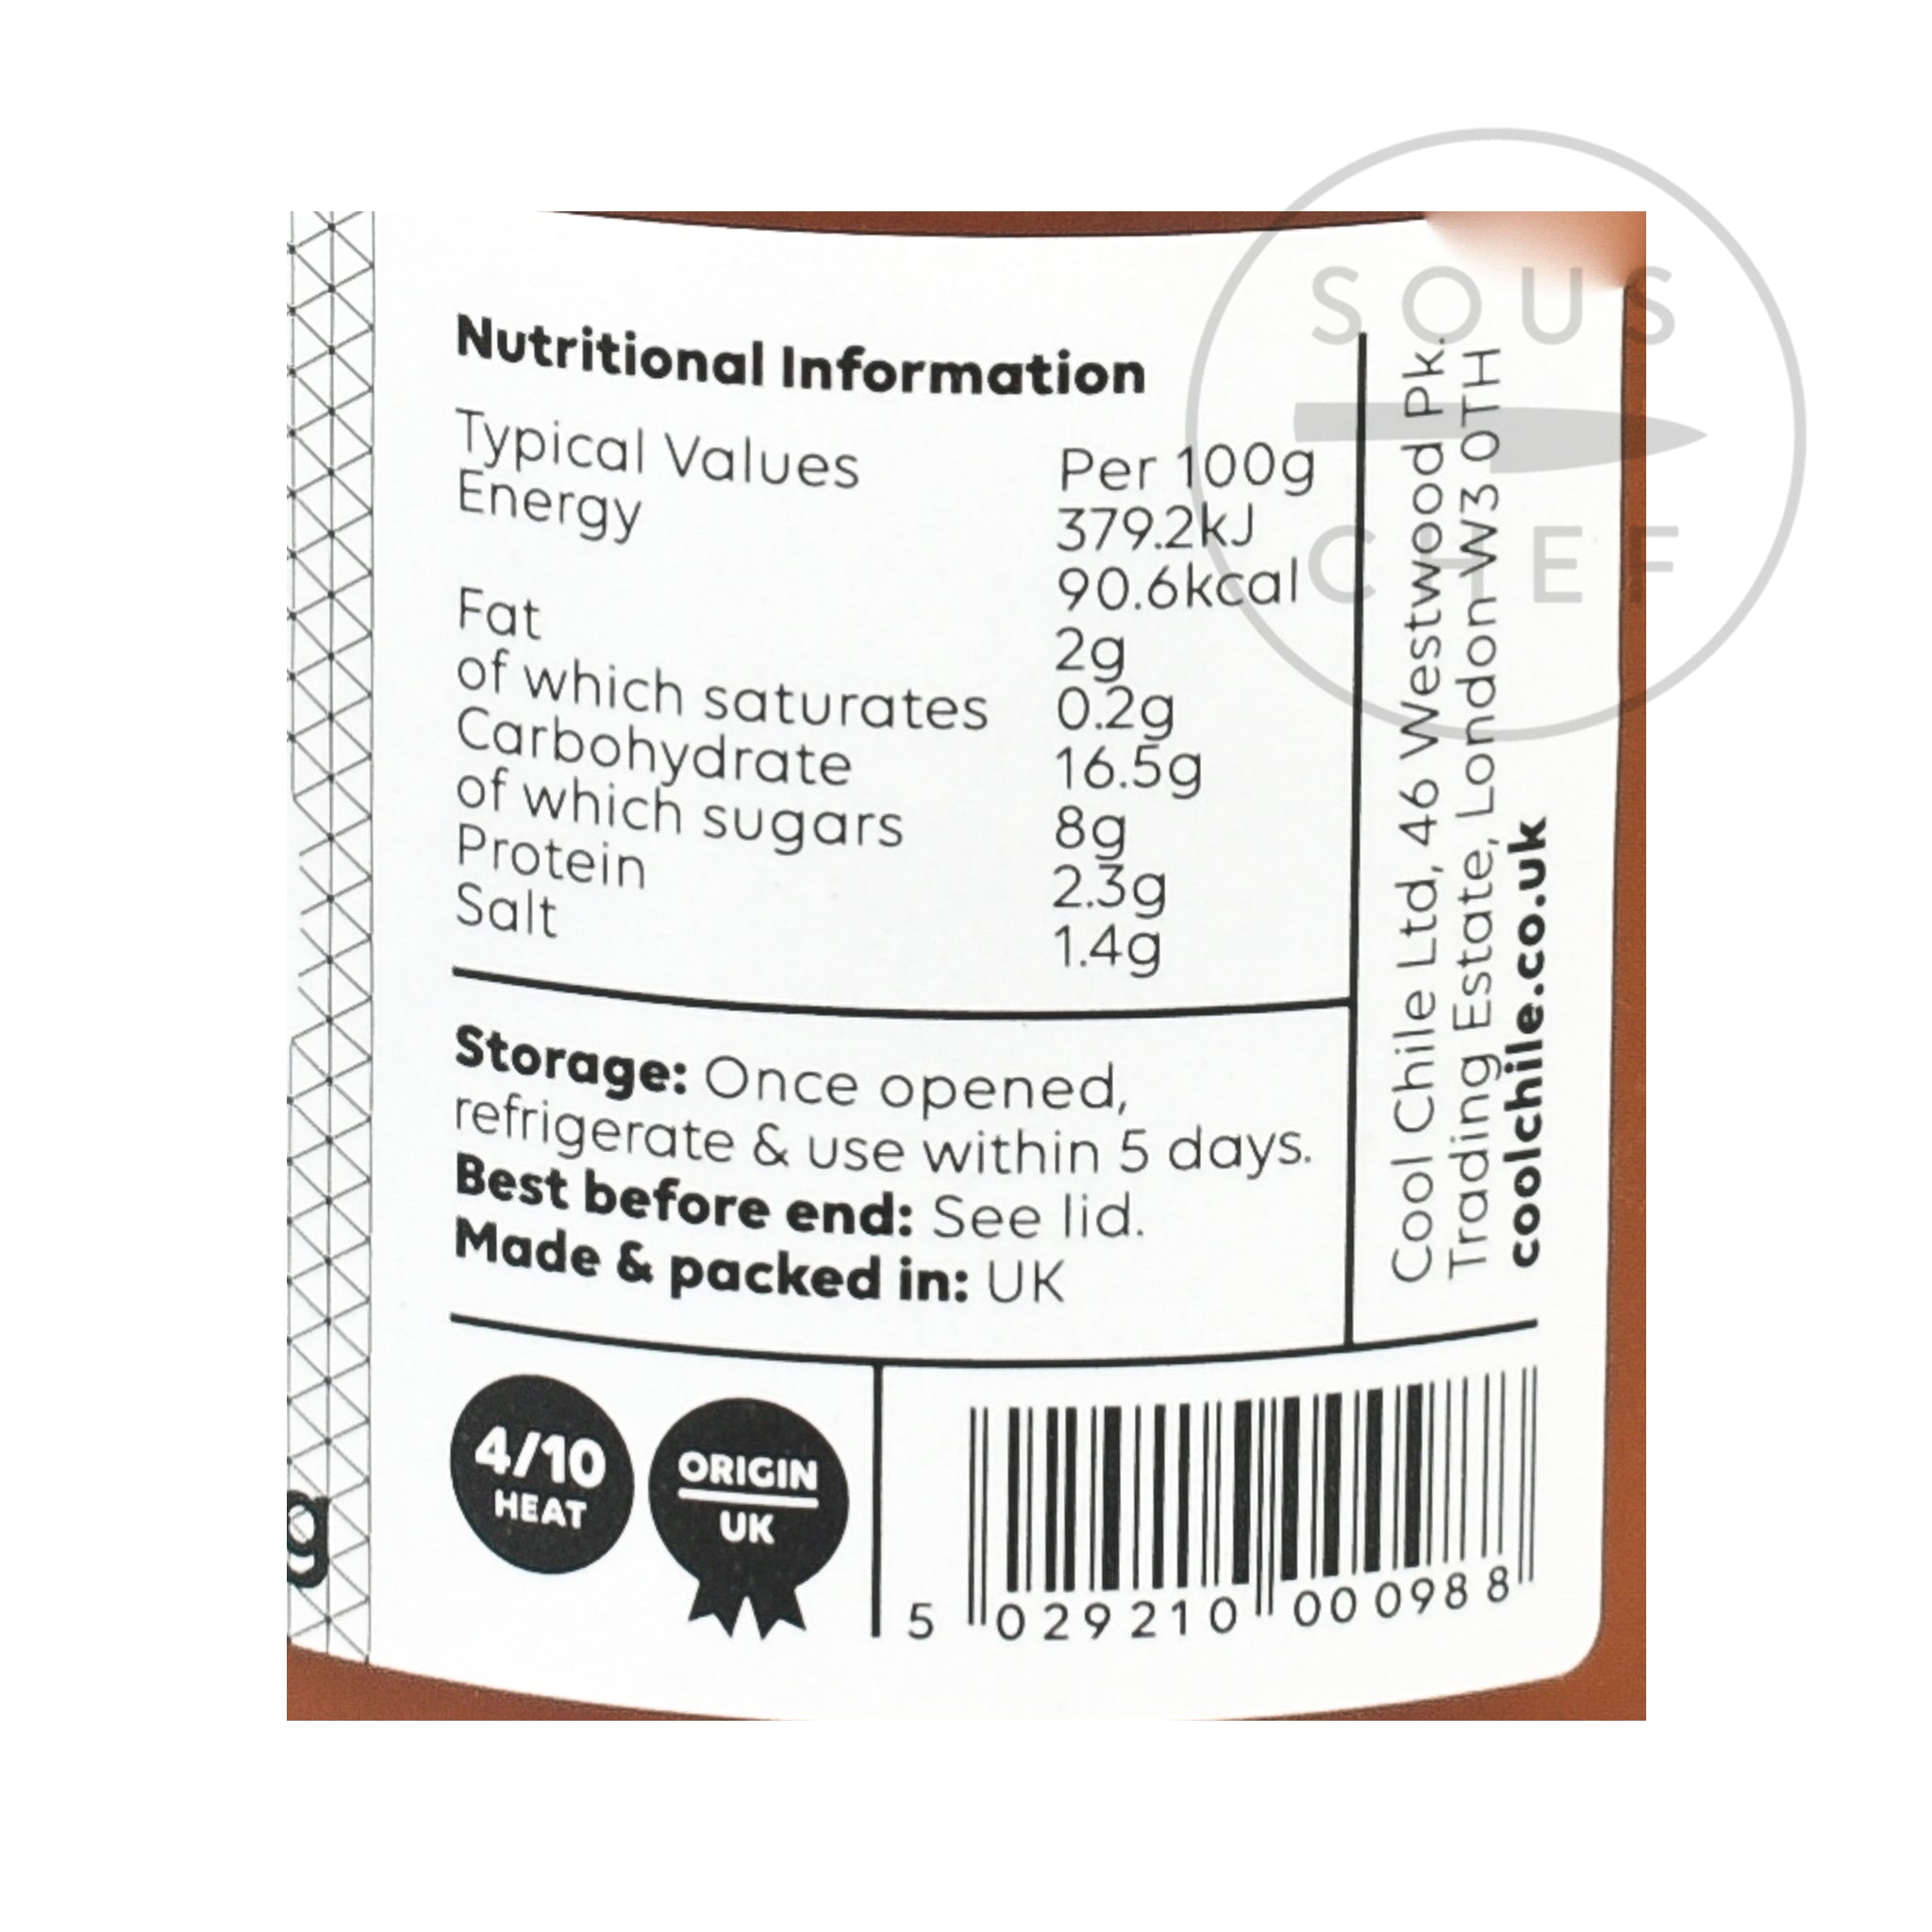 Cool Chile Co Ranchero Sauce 260g Ingredients American Sauces & Condiments Mexican Food Ingredients Nutritional Information